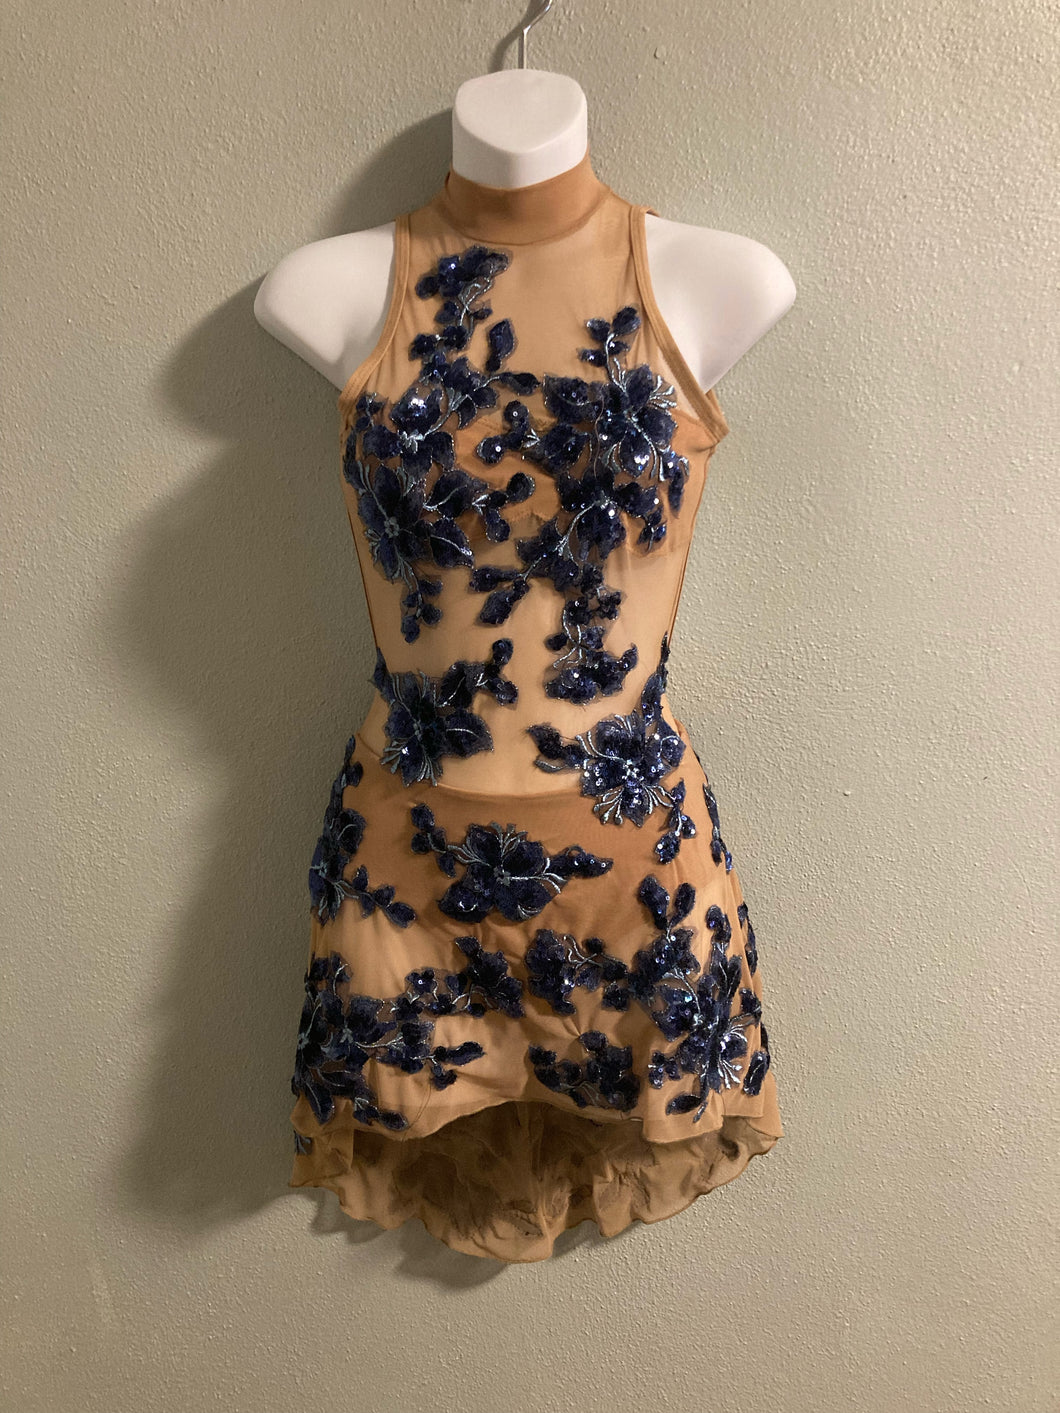 Custom made competitive dance dress for Ellie, mesh with navy blue appliques